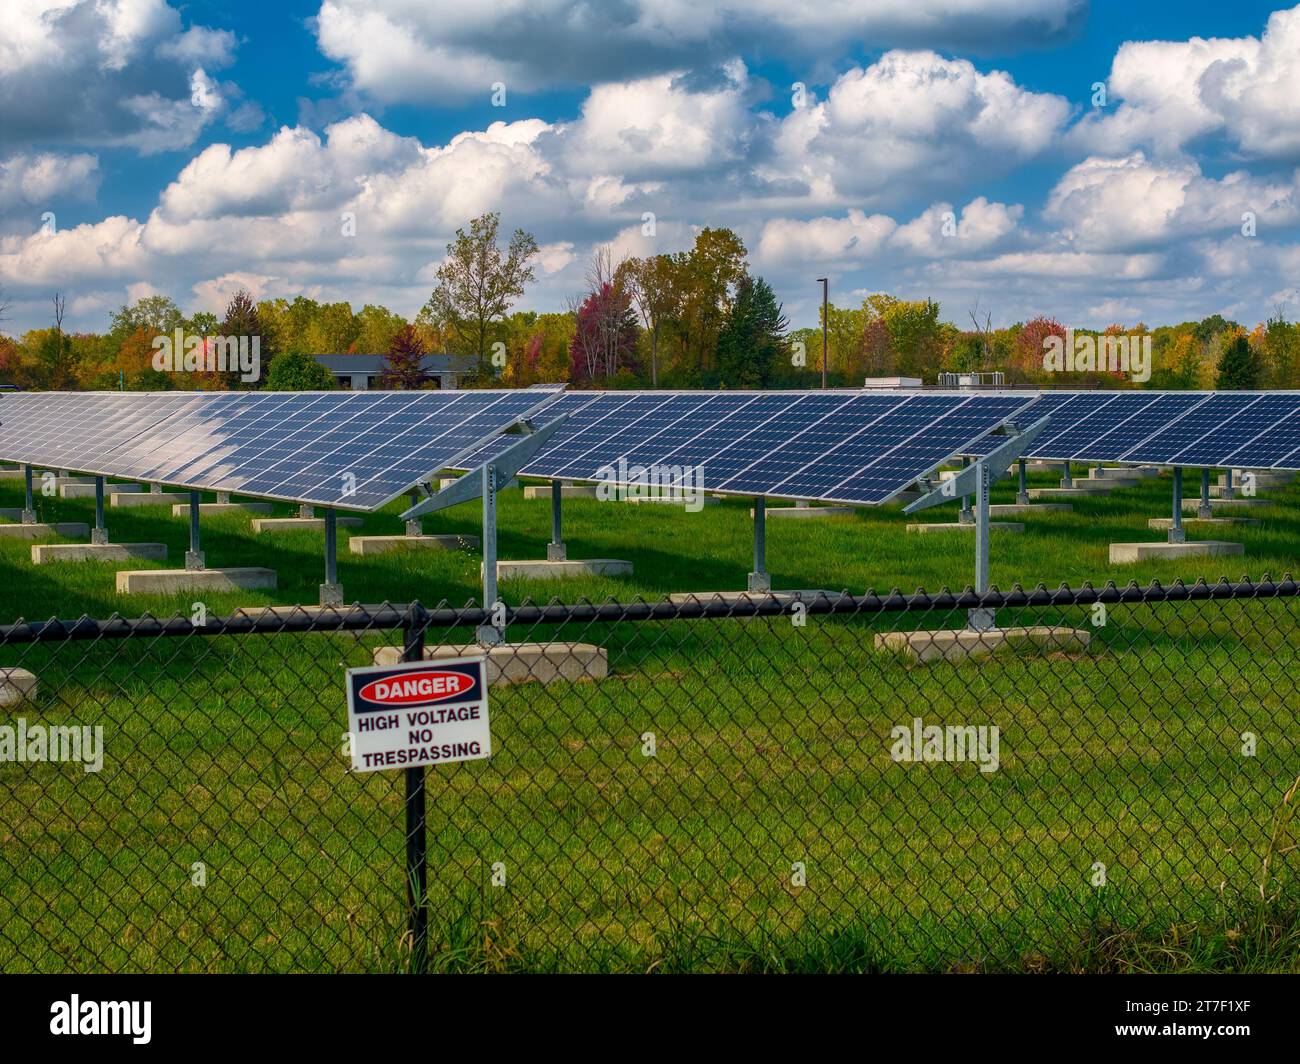 DTE Energy Solar Current Installation in Marysville, St. Clair County, Michigan Stockfoto